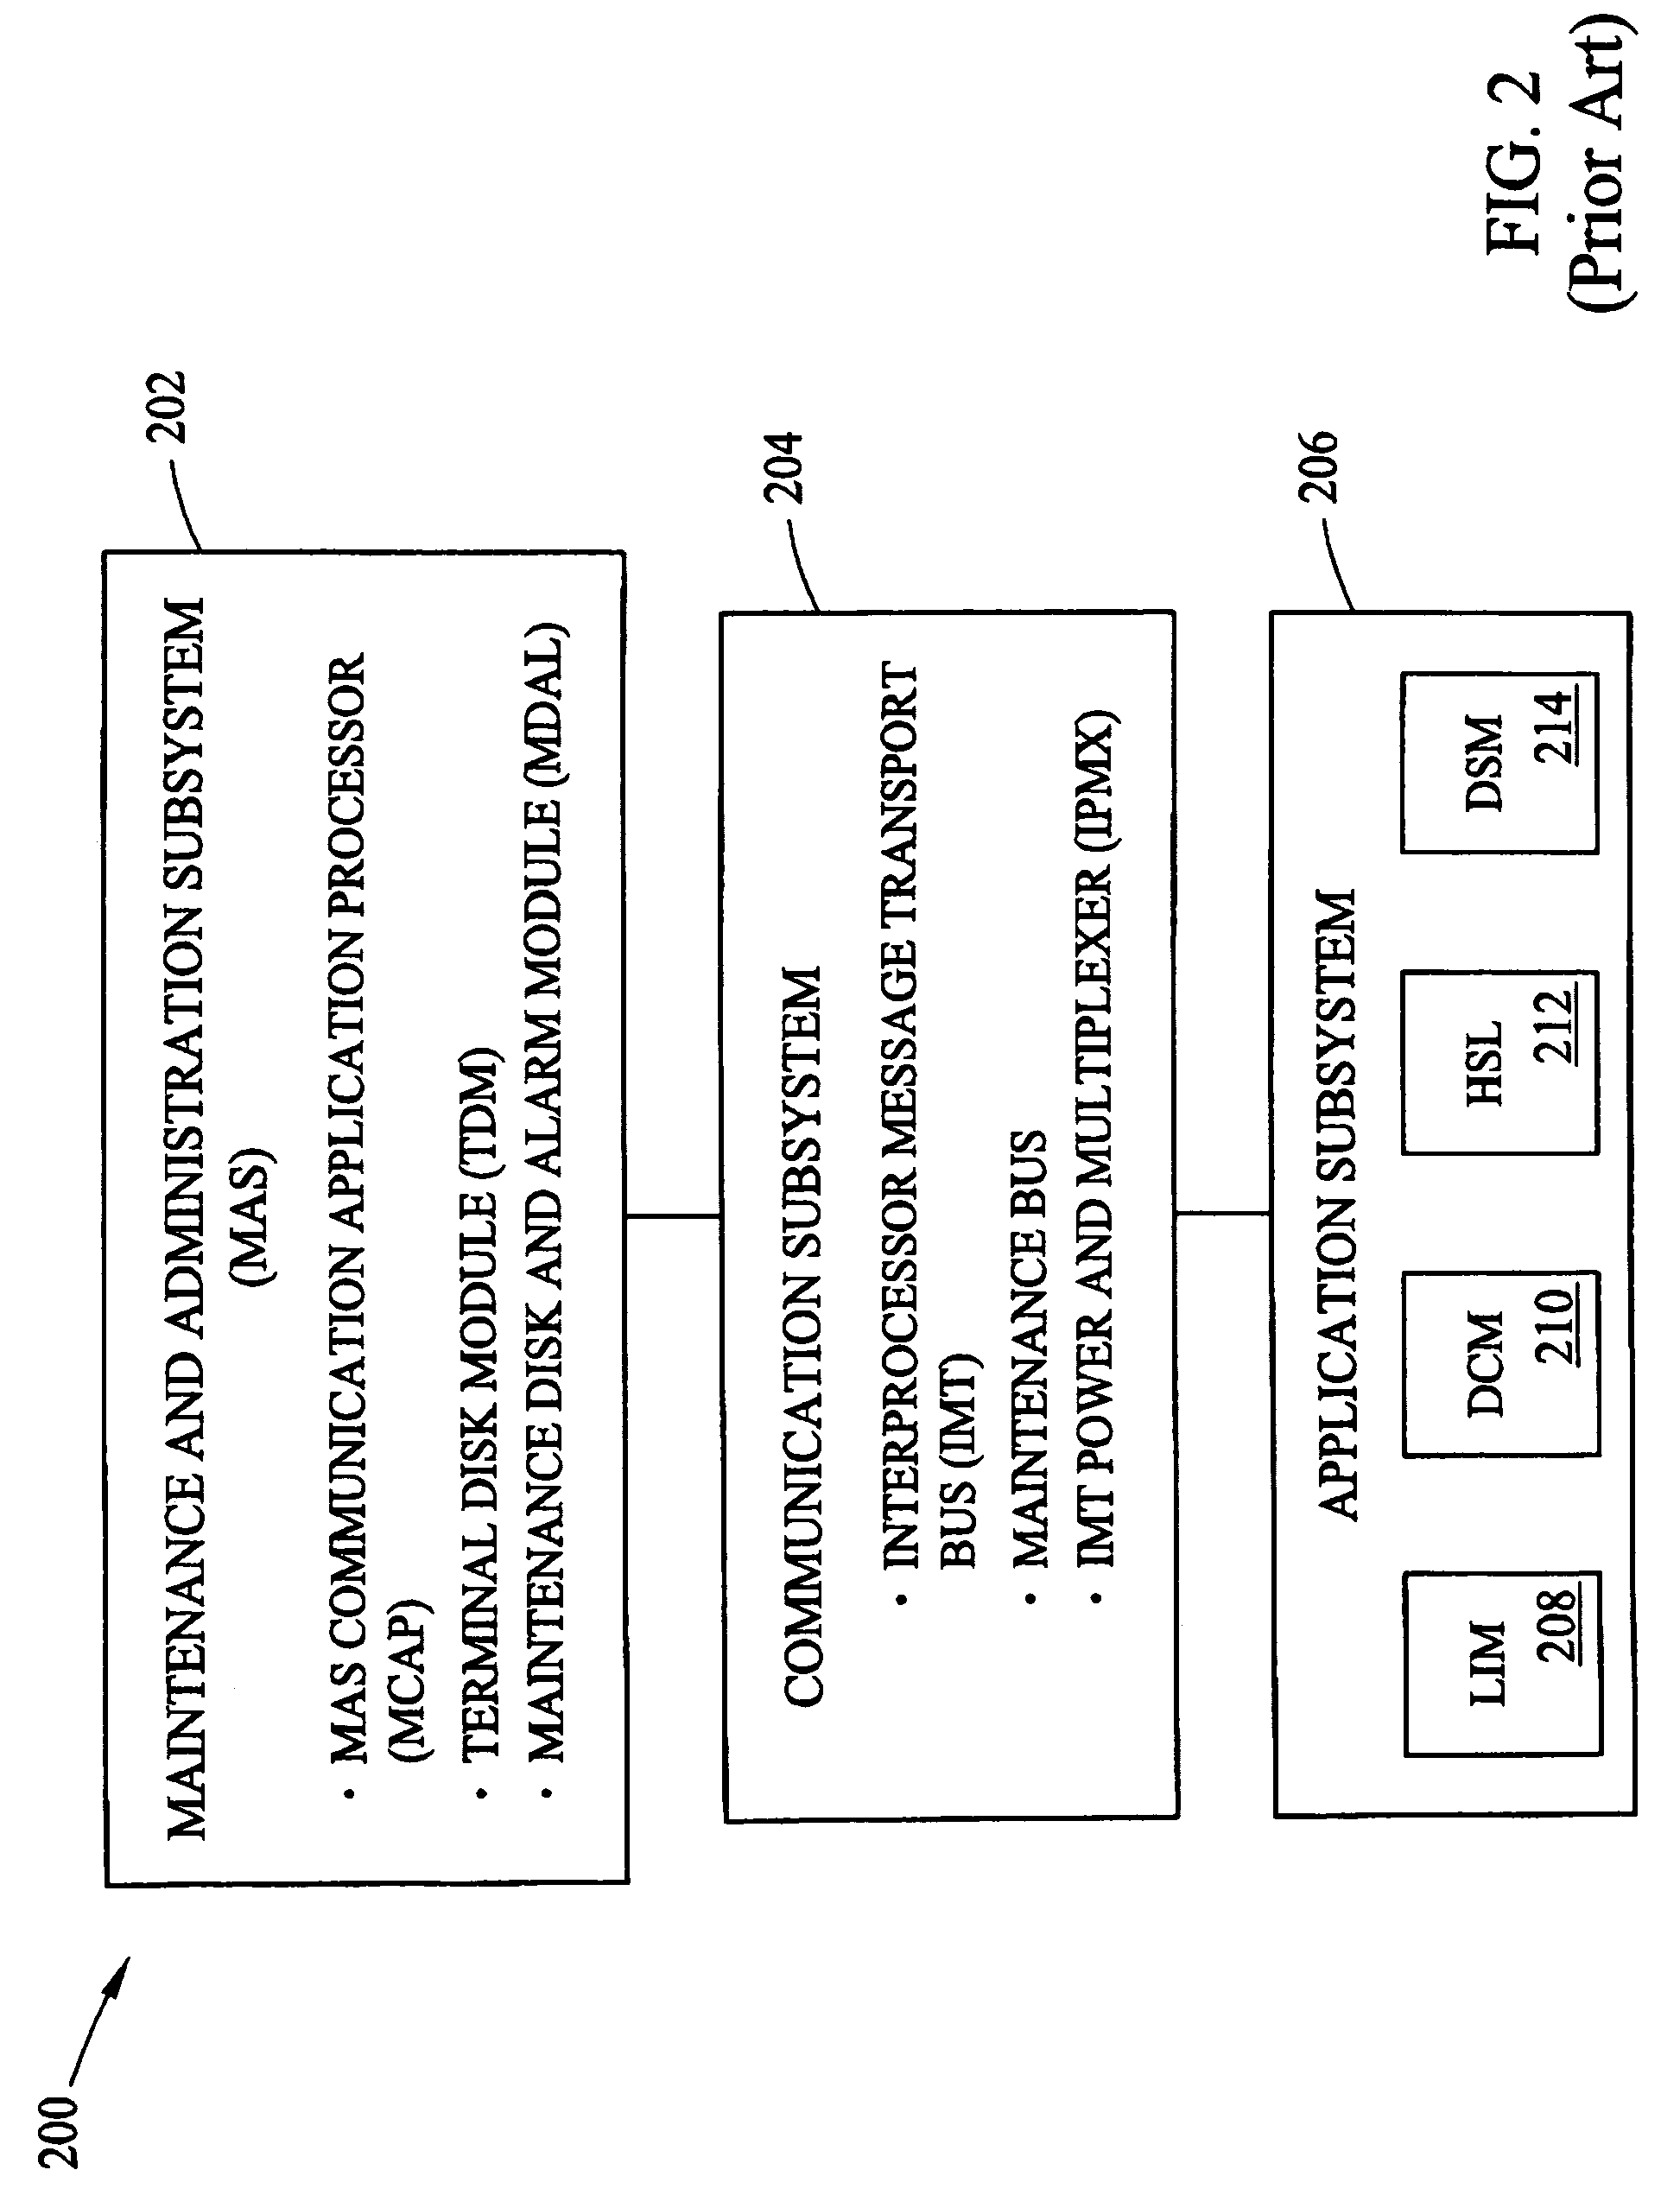 Methods and systems for distributing application data among multiple processing modules in a telecommunications network element having a distributed internal processing architecture